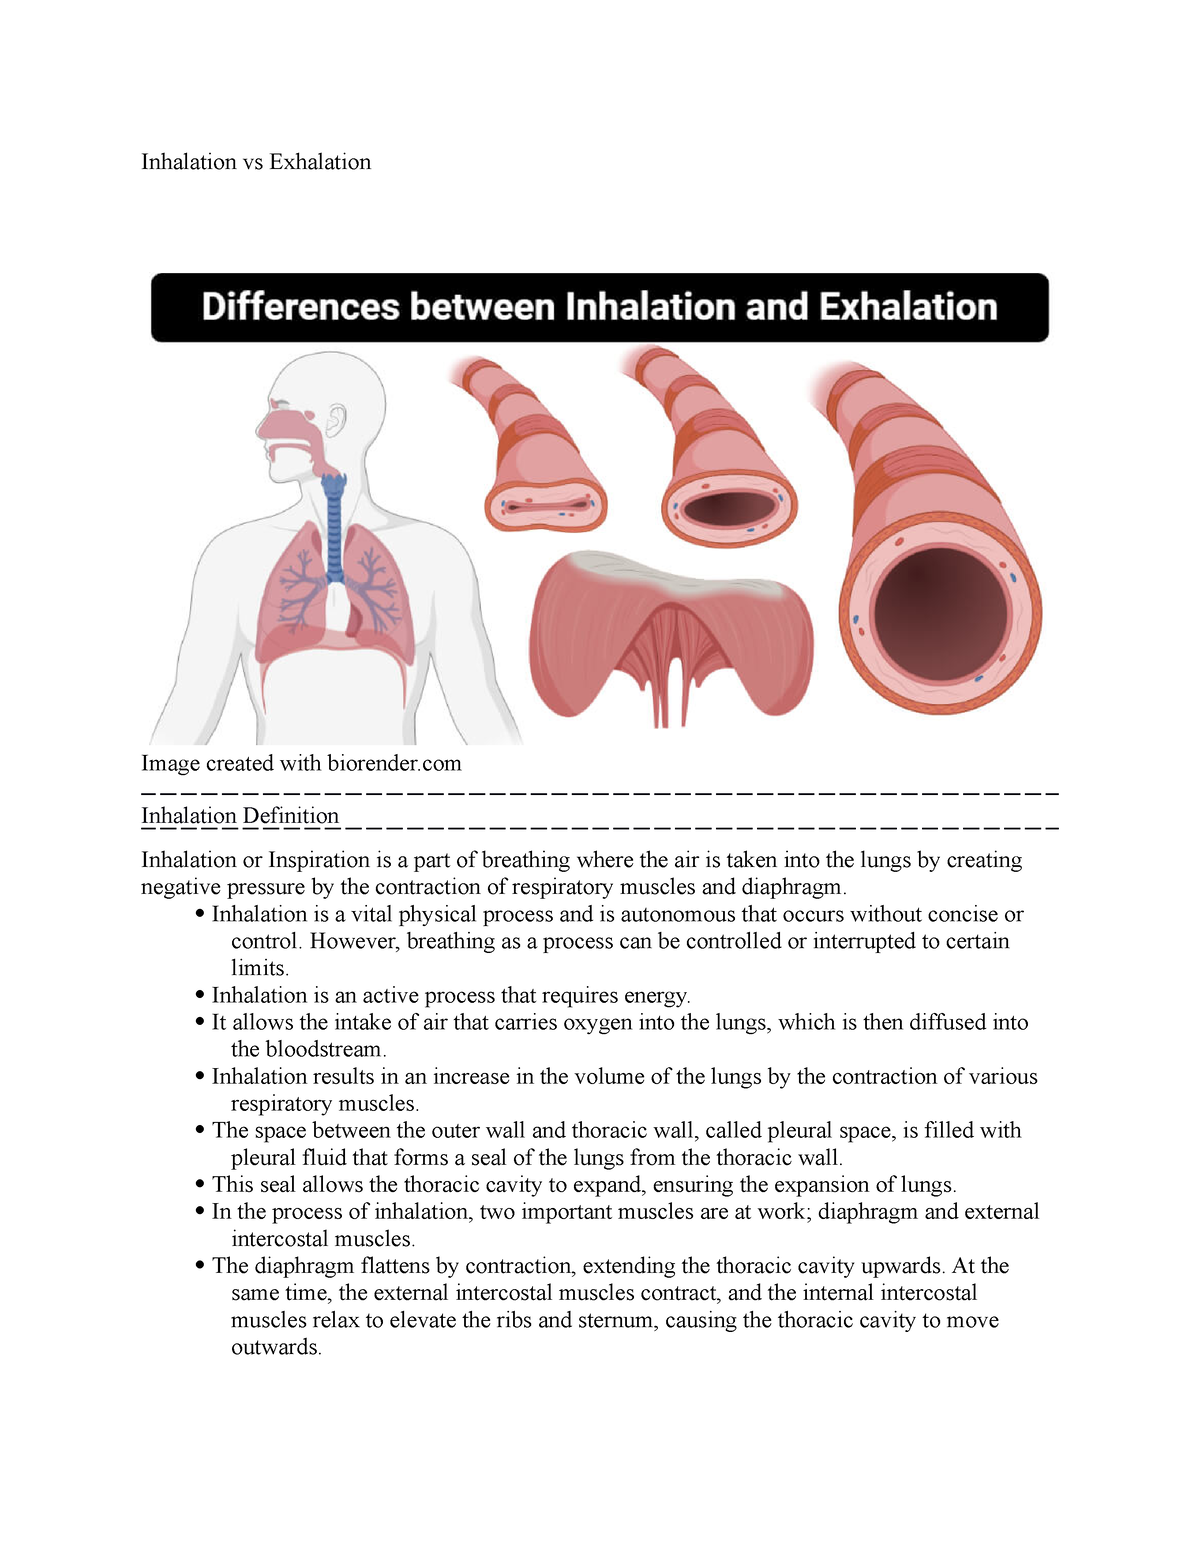 Biology Physics Chemistry - What is the difference between Inhalation and  Exhalation? • Inhalation is the intake of air into lungs, whereas  exhalation is the pushing out of air from lungs. •